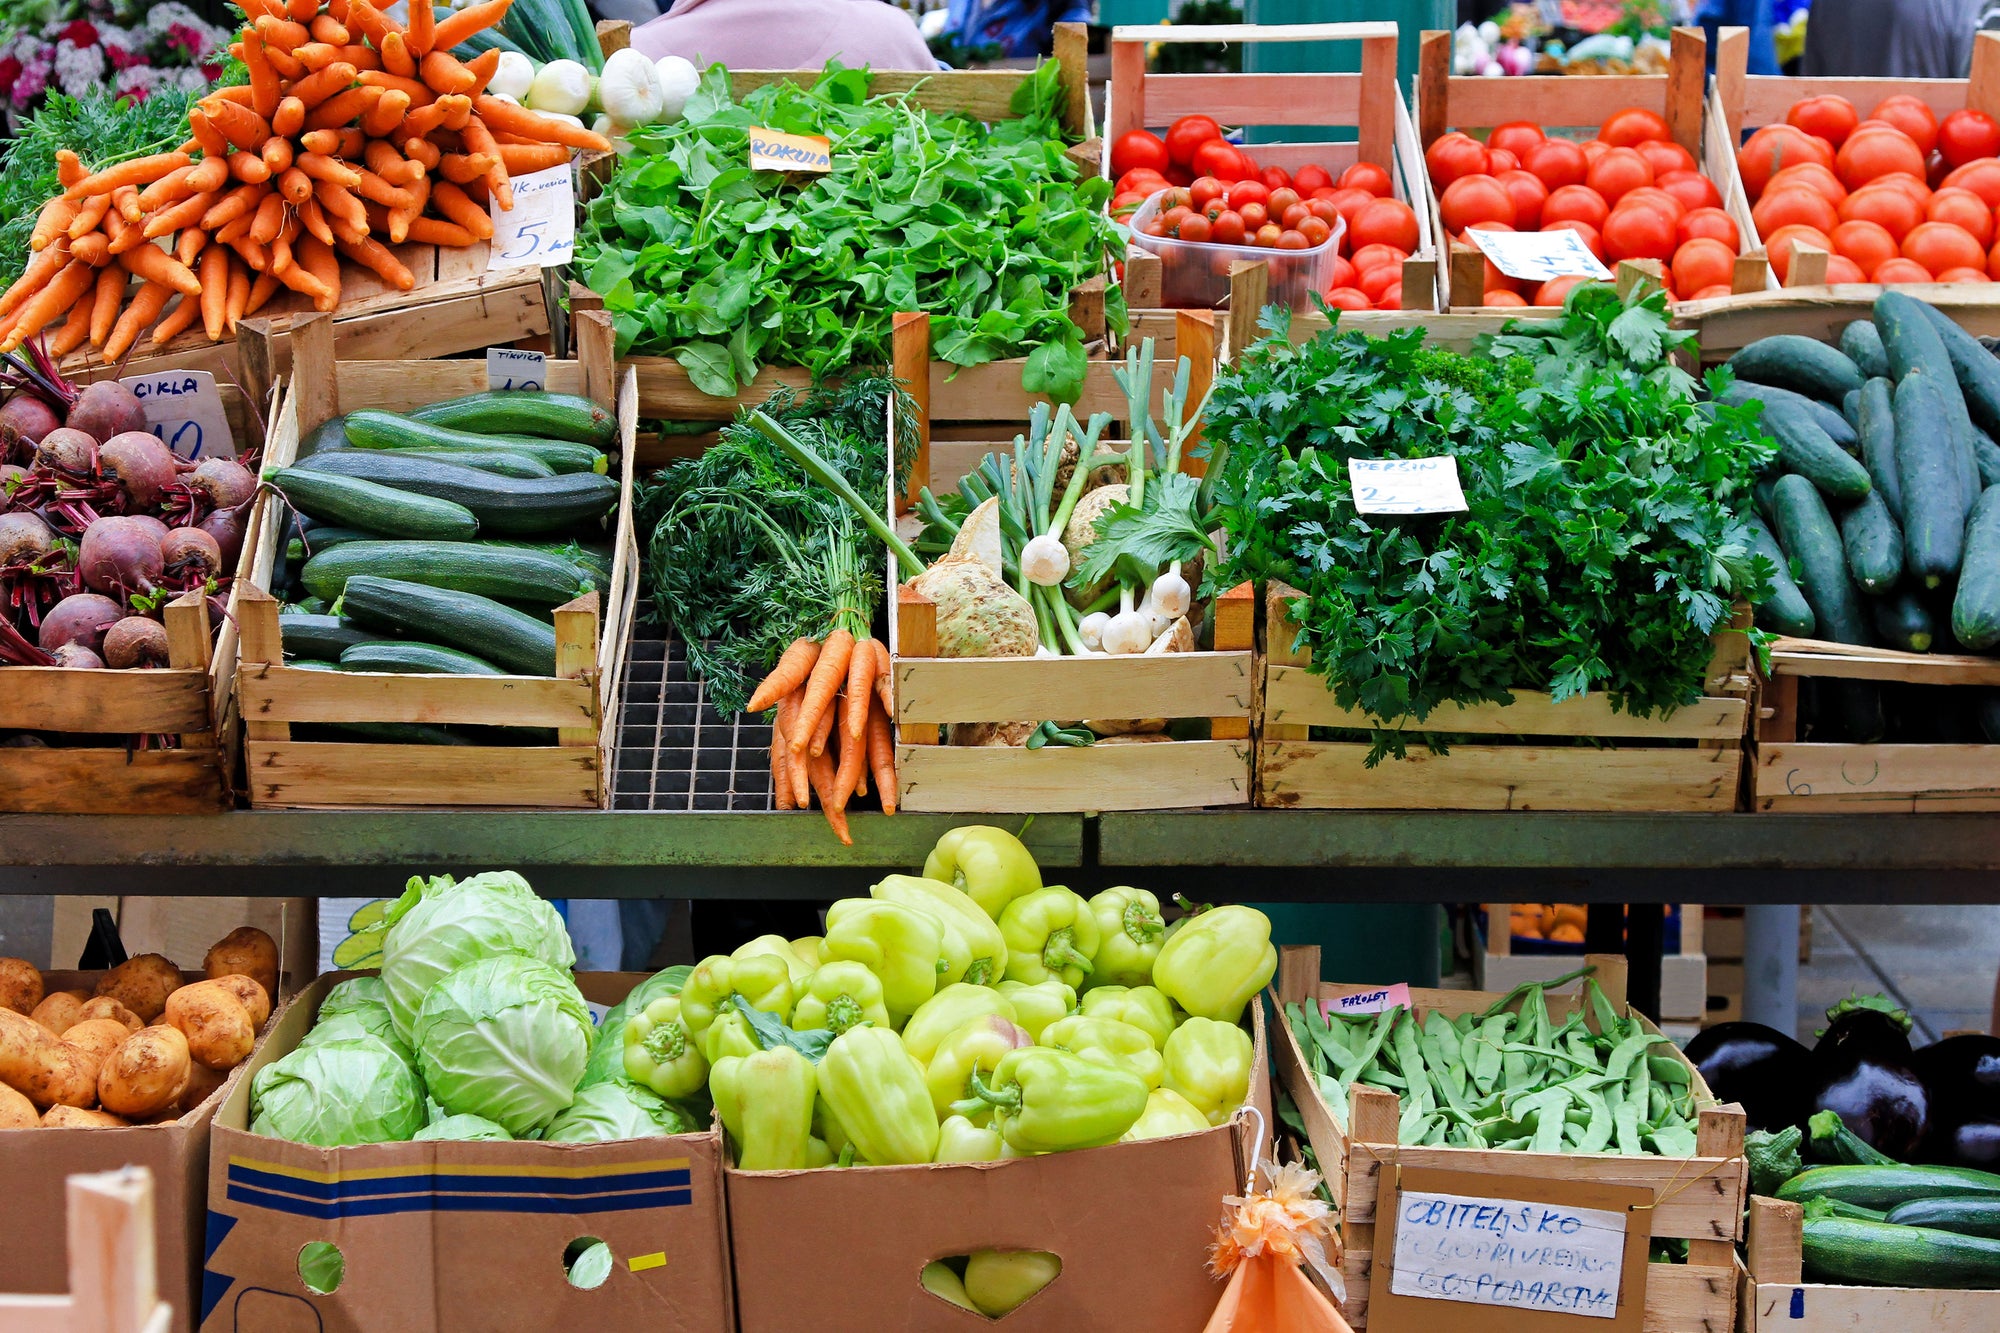 Farmer's Market Produce vs Grocery Store Produce: Which is Better for Your Microbiome?